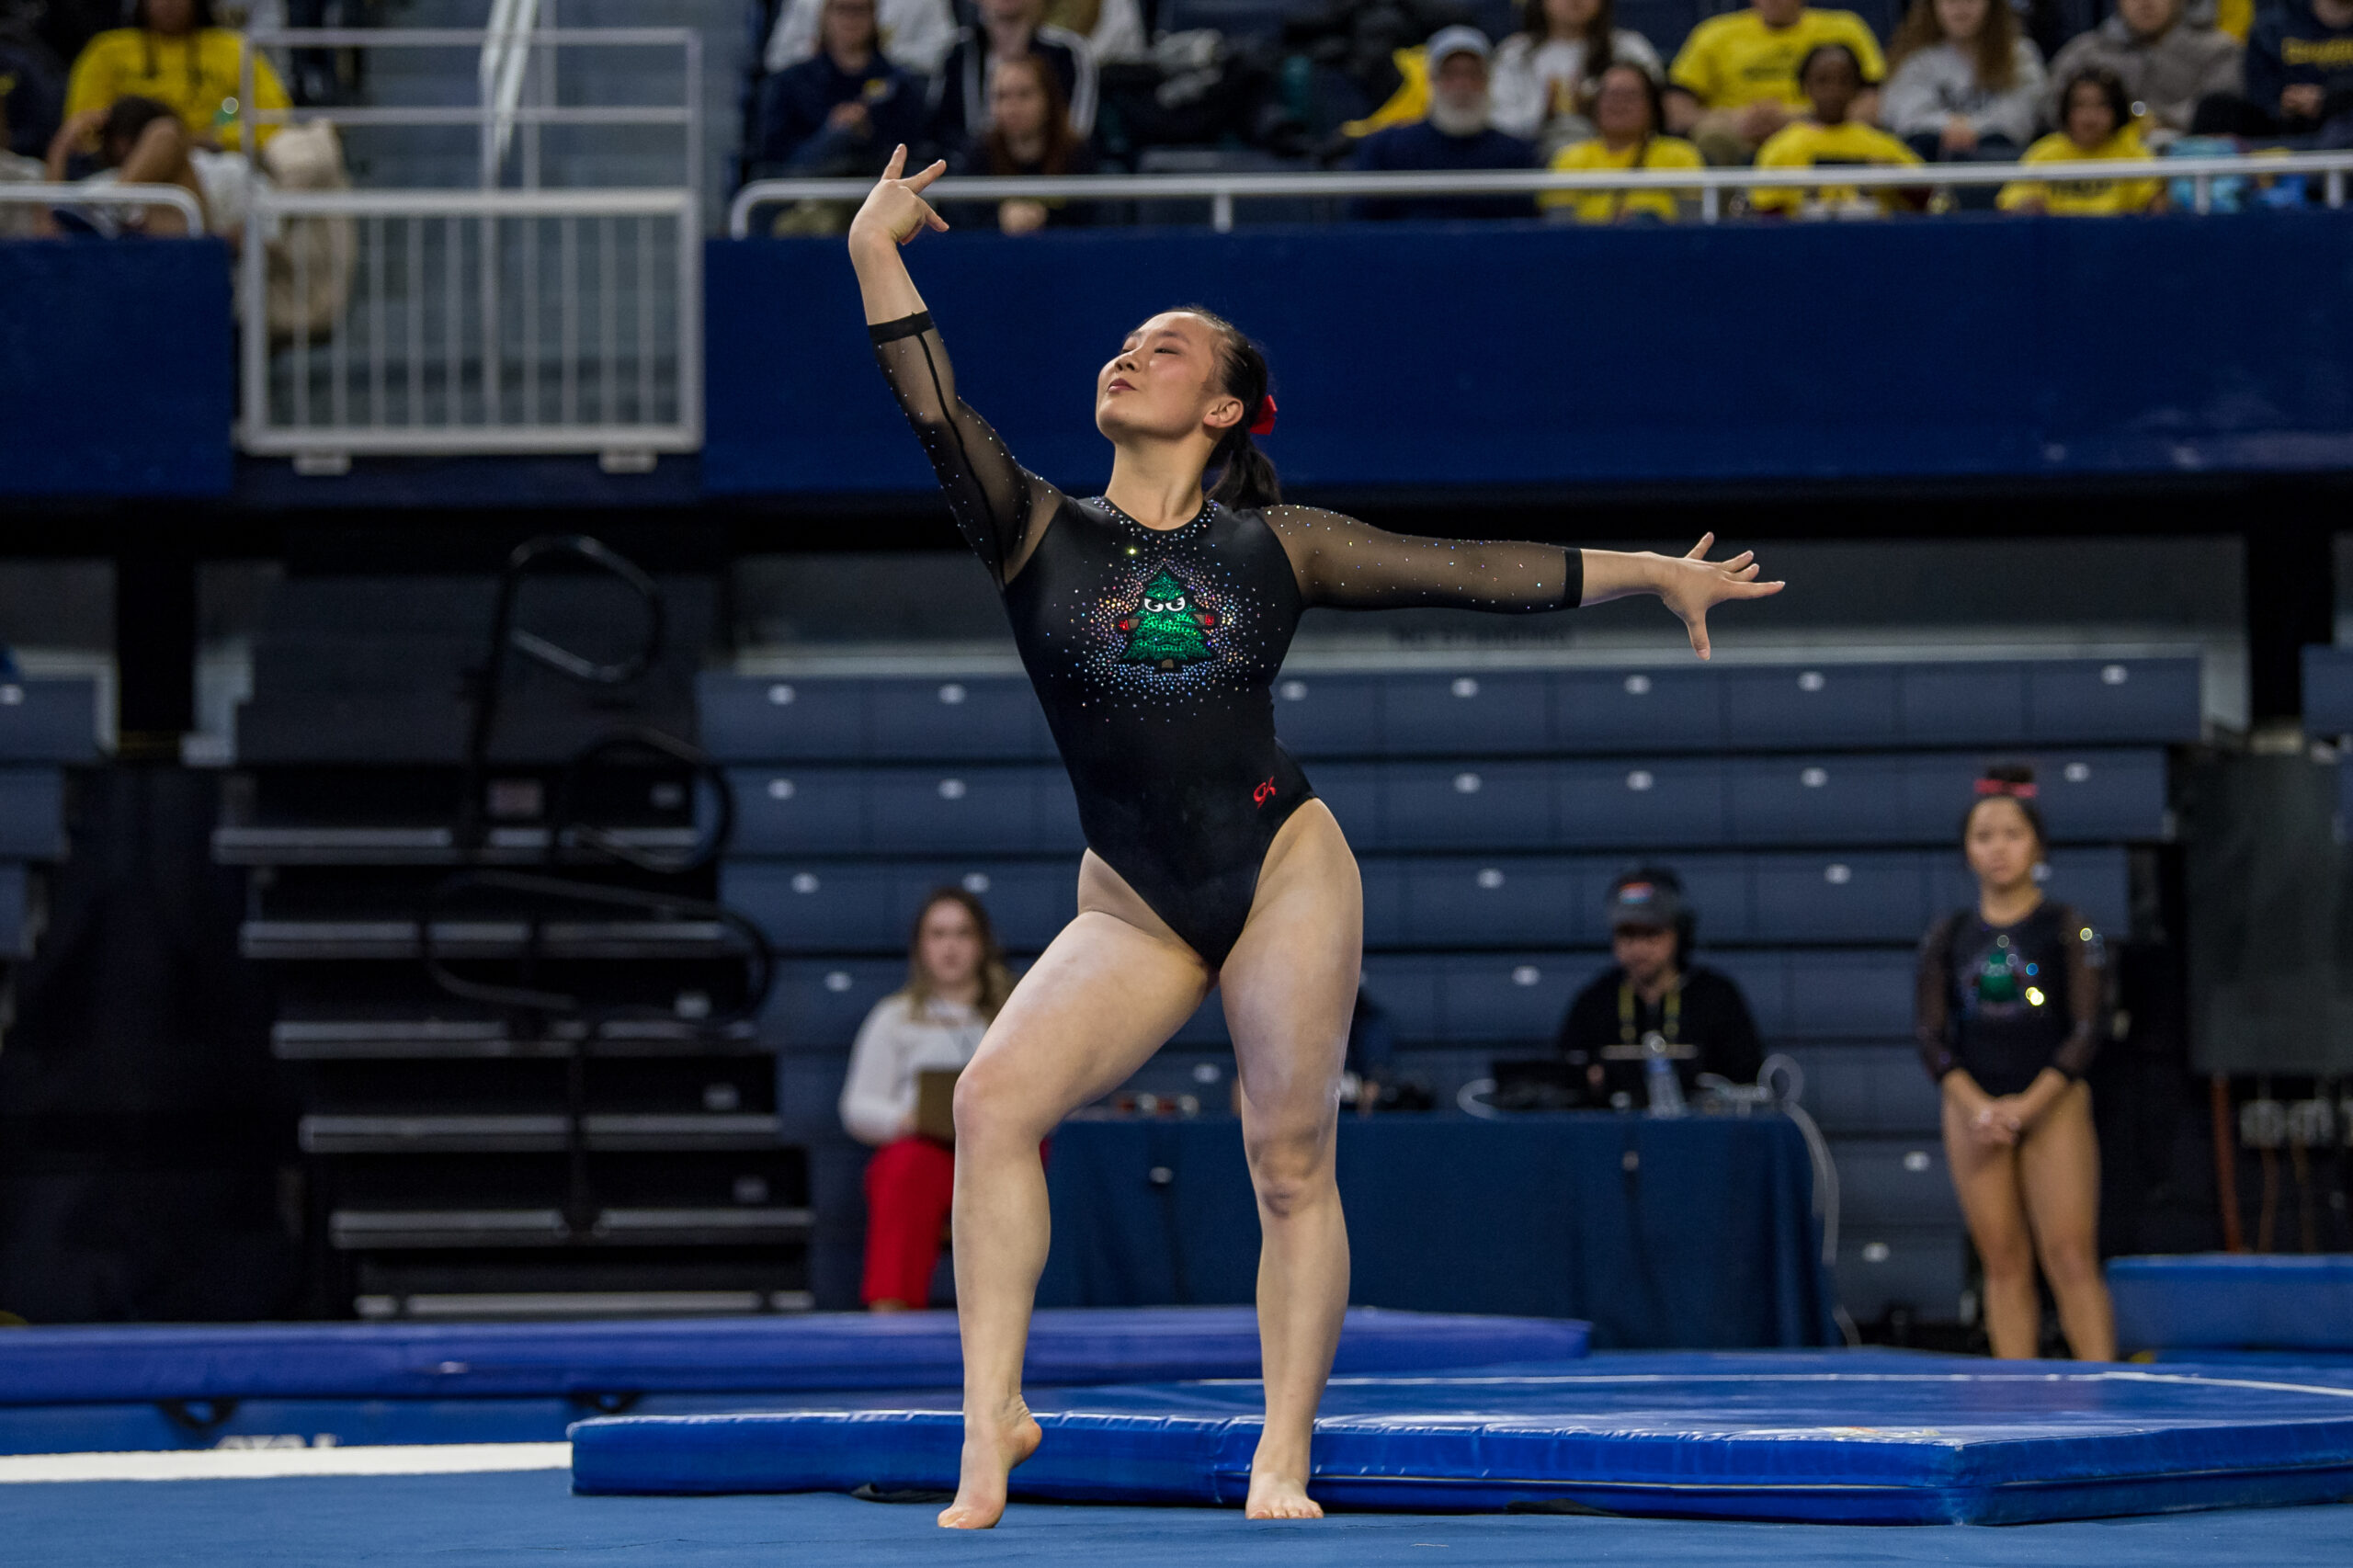 The story behind the leo: Stanford's Angry Tree leo is 'campy' - Gymnastics  Now